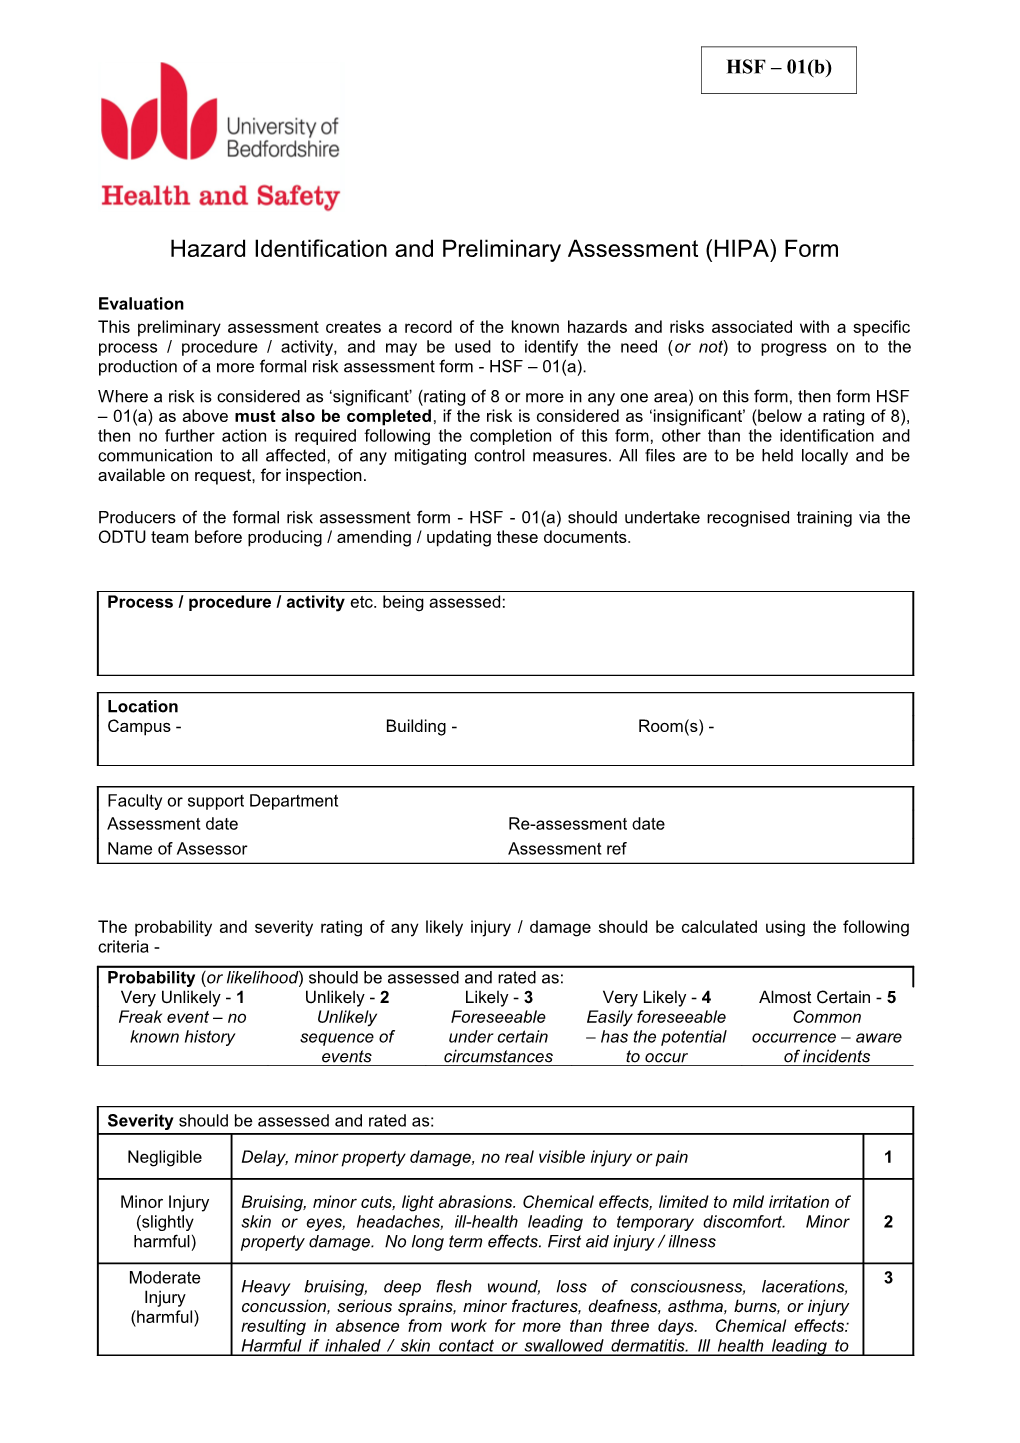 Hazard Identification and Preliminary Assessment (HIPA) Form